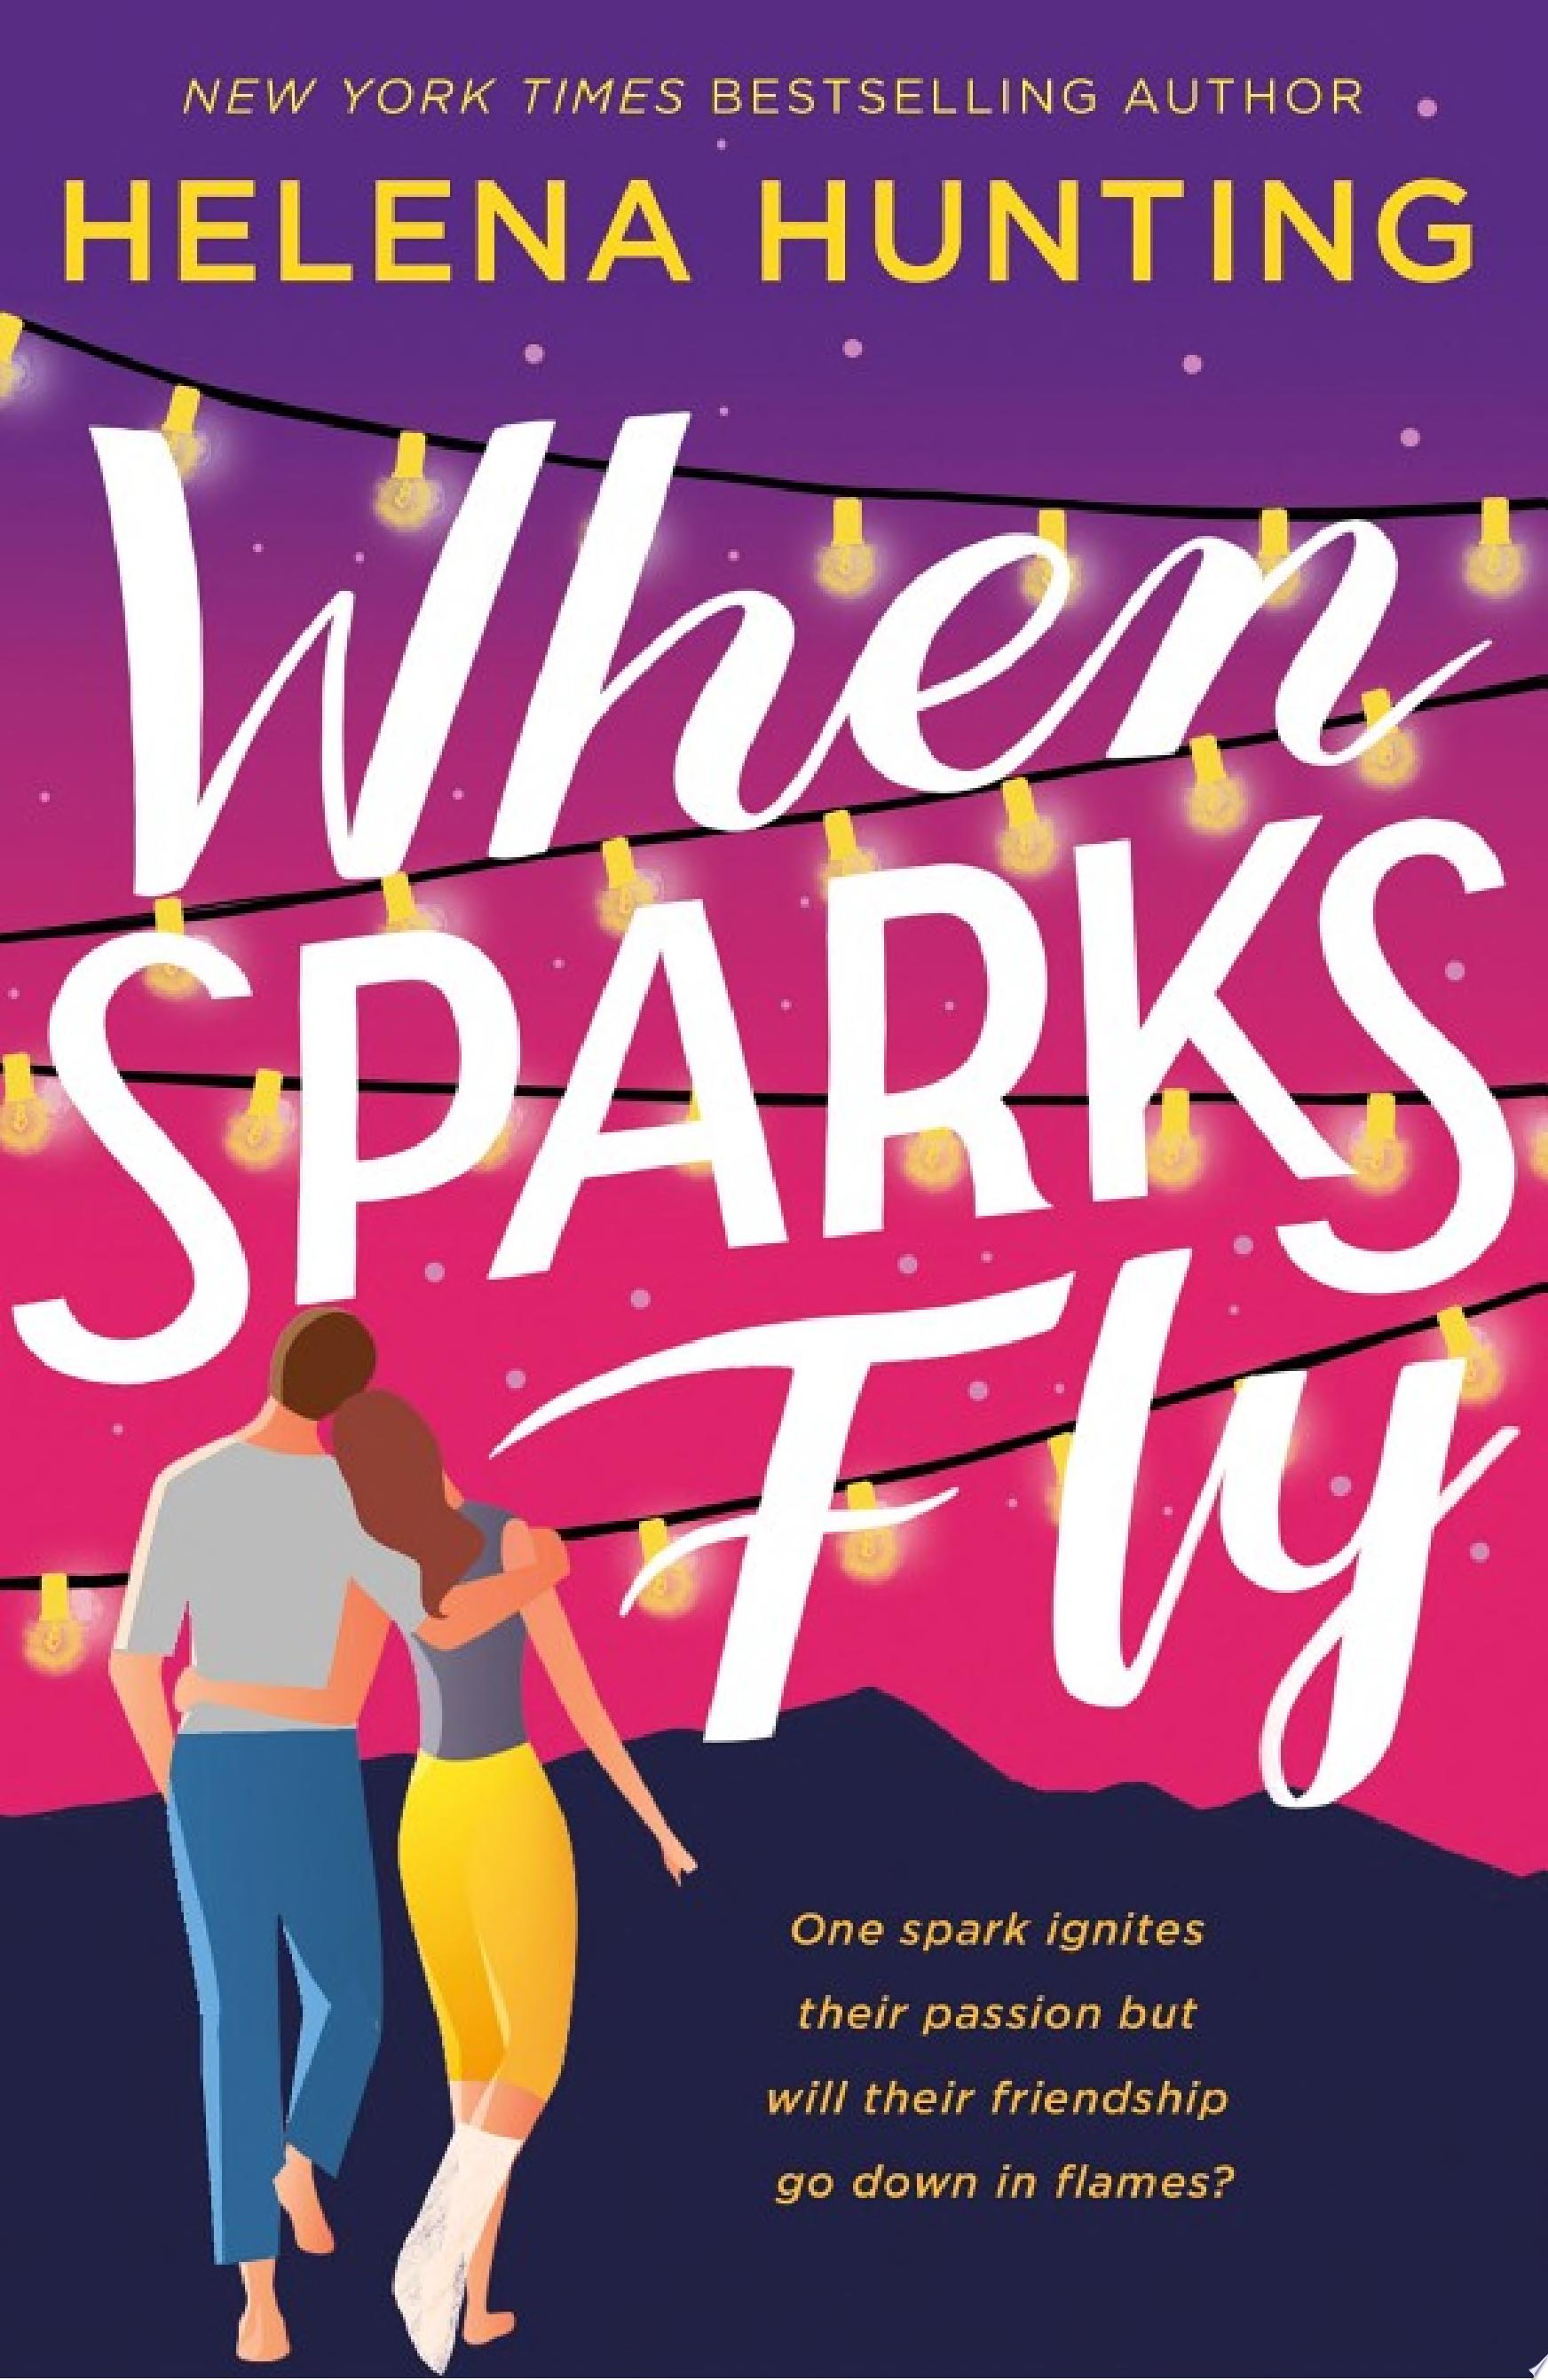 Image for "When Sparks Fly"